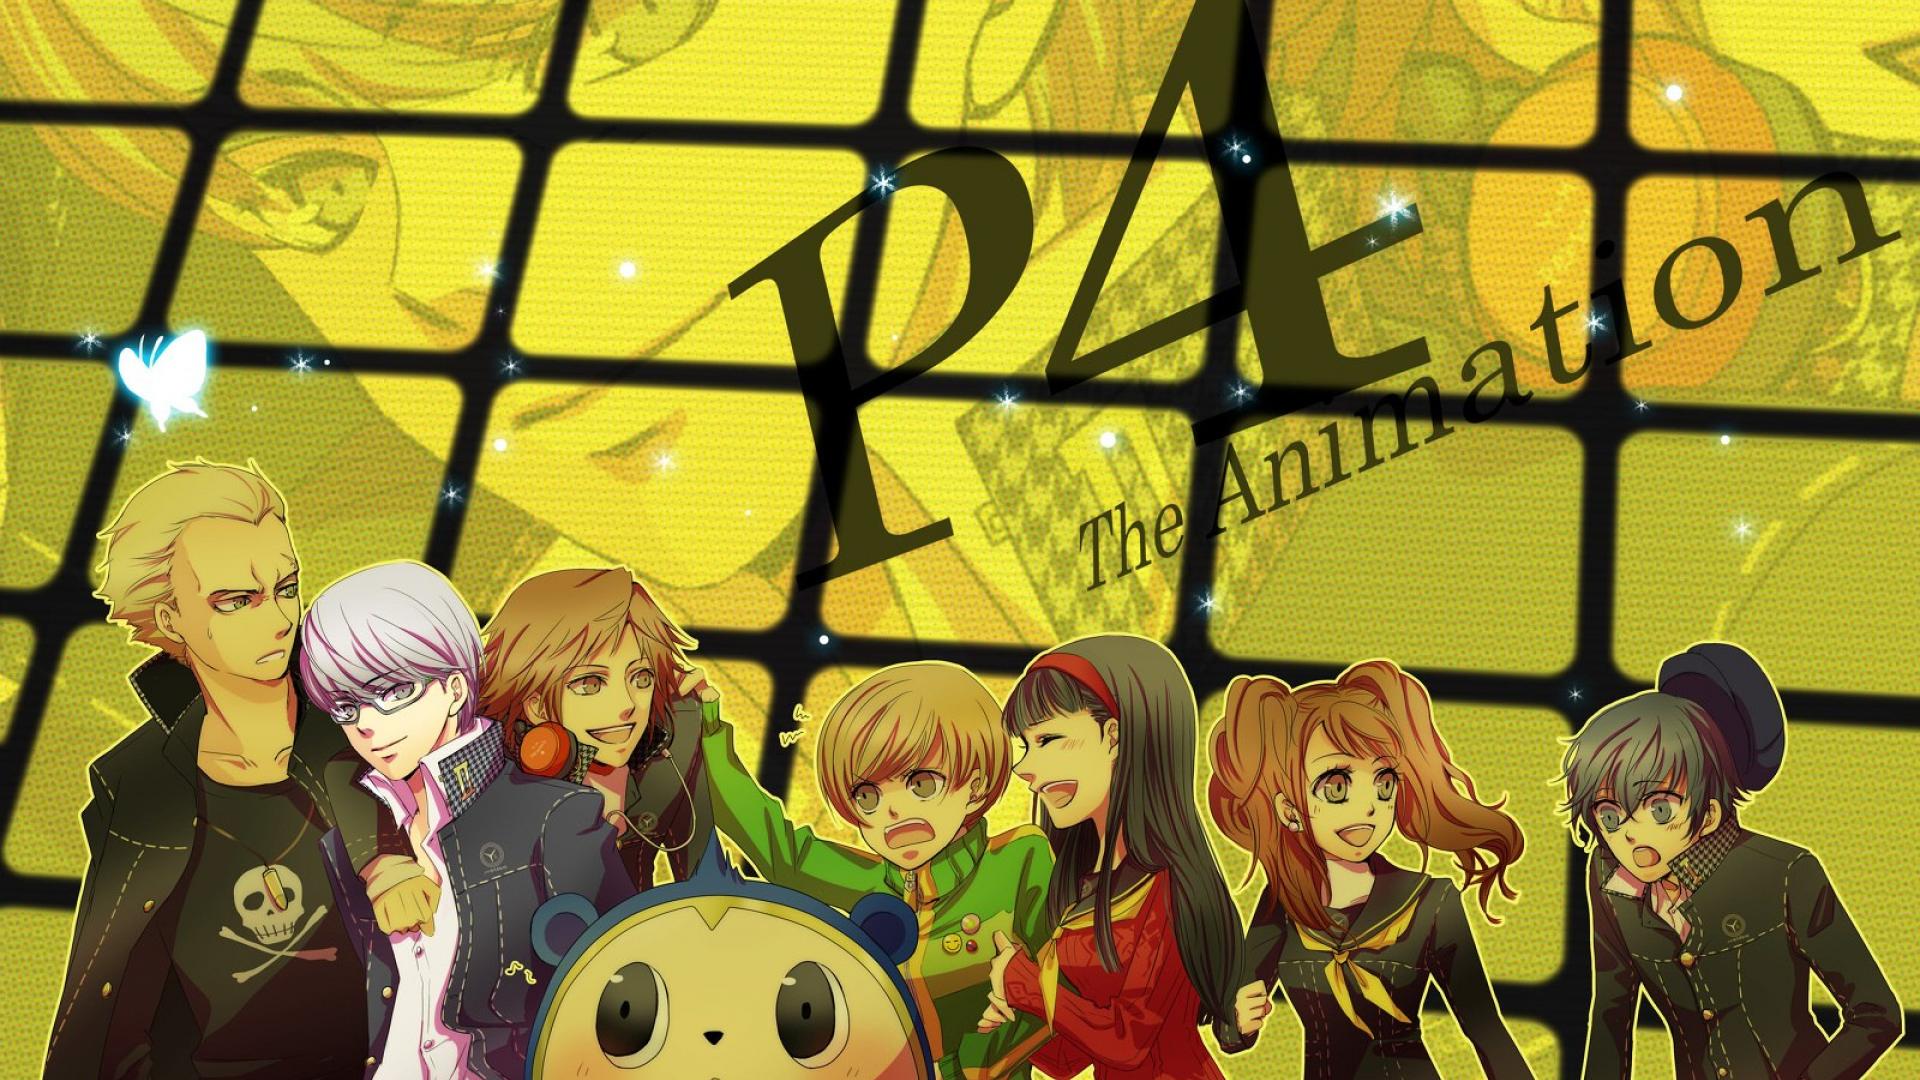 Persona 4 wallpaper 1600x1033 - (#30586) - High Quality and ...